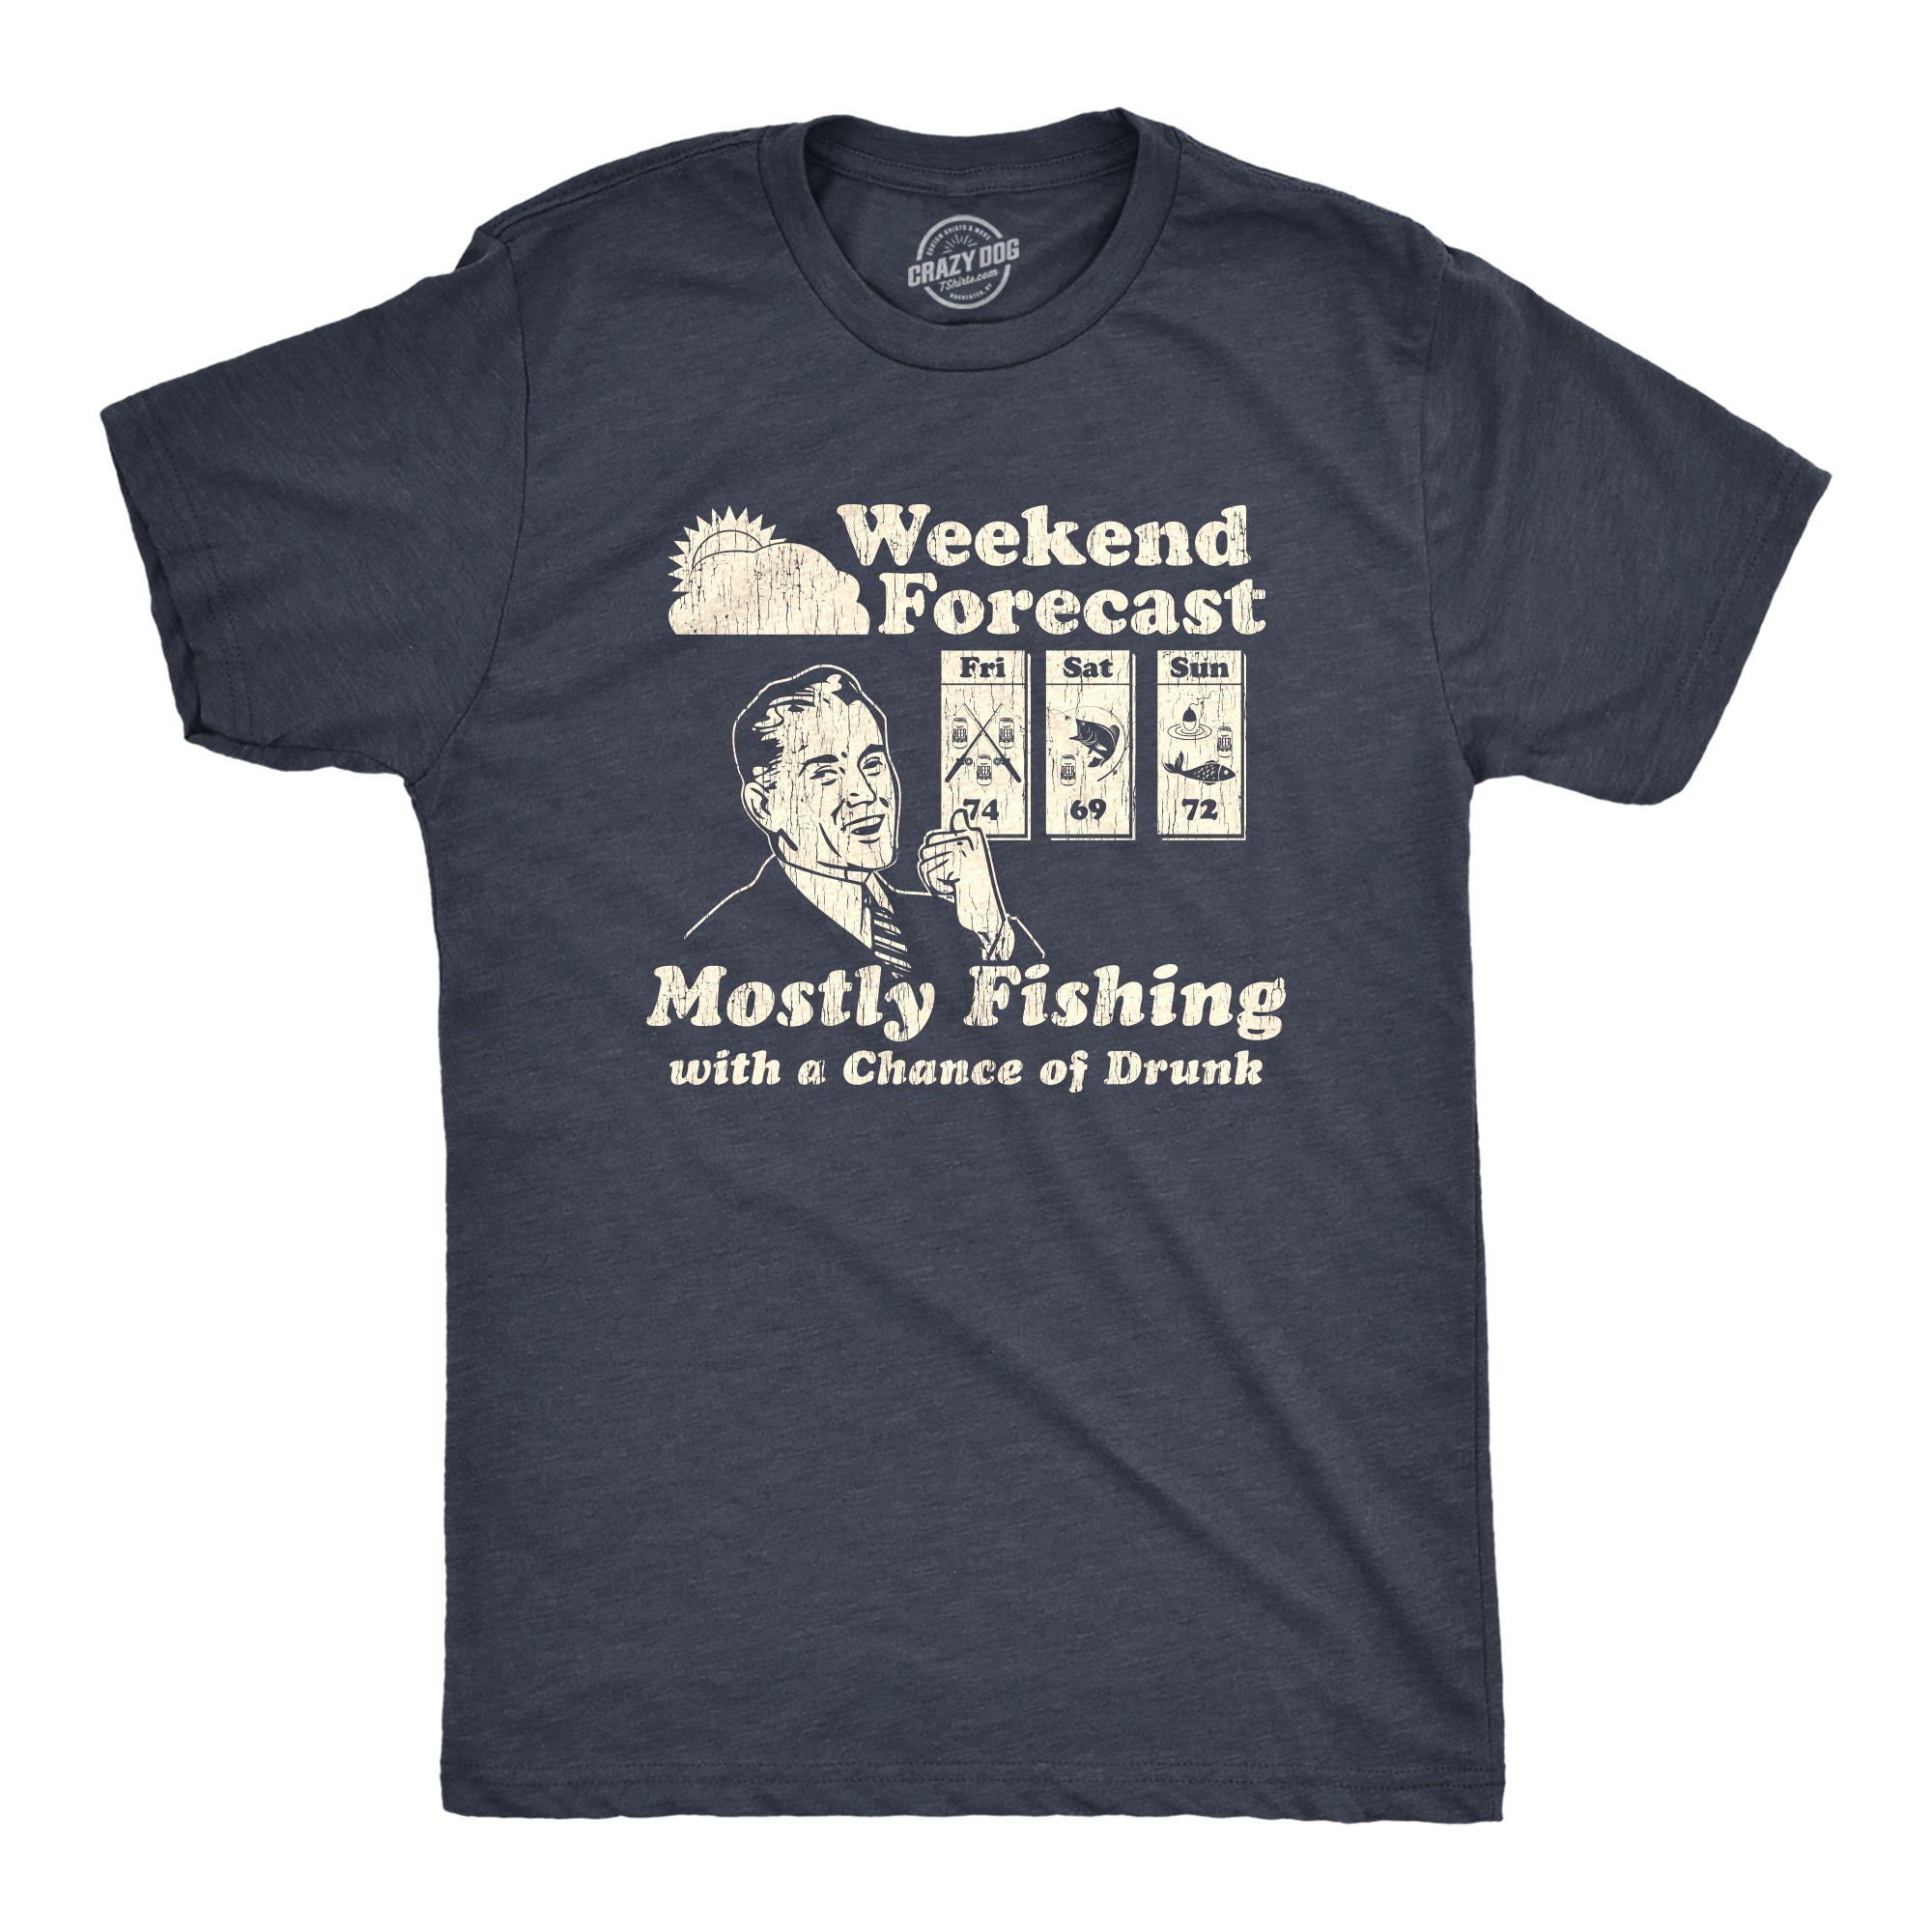 Funny Heather Navy - Forecast Weekend Forecast Mostly Fishing With A Chance Of Drunk Mens T Shirt Nerdy Fishing Drinking Tee